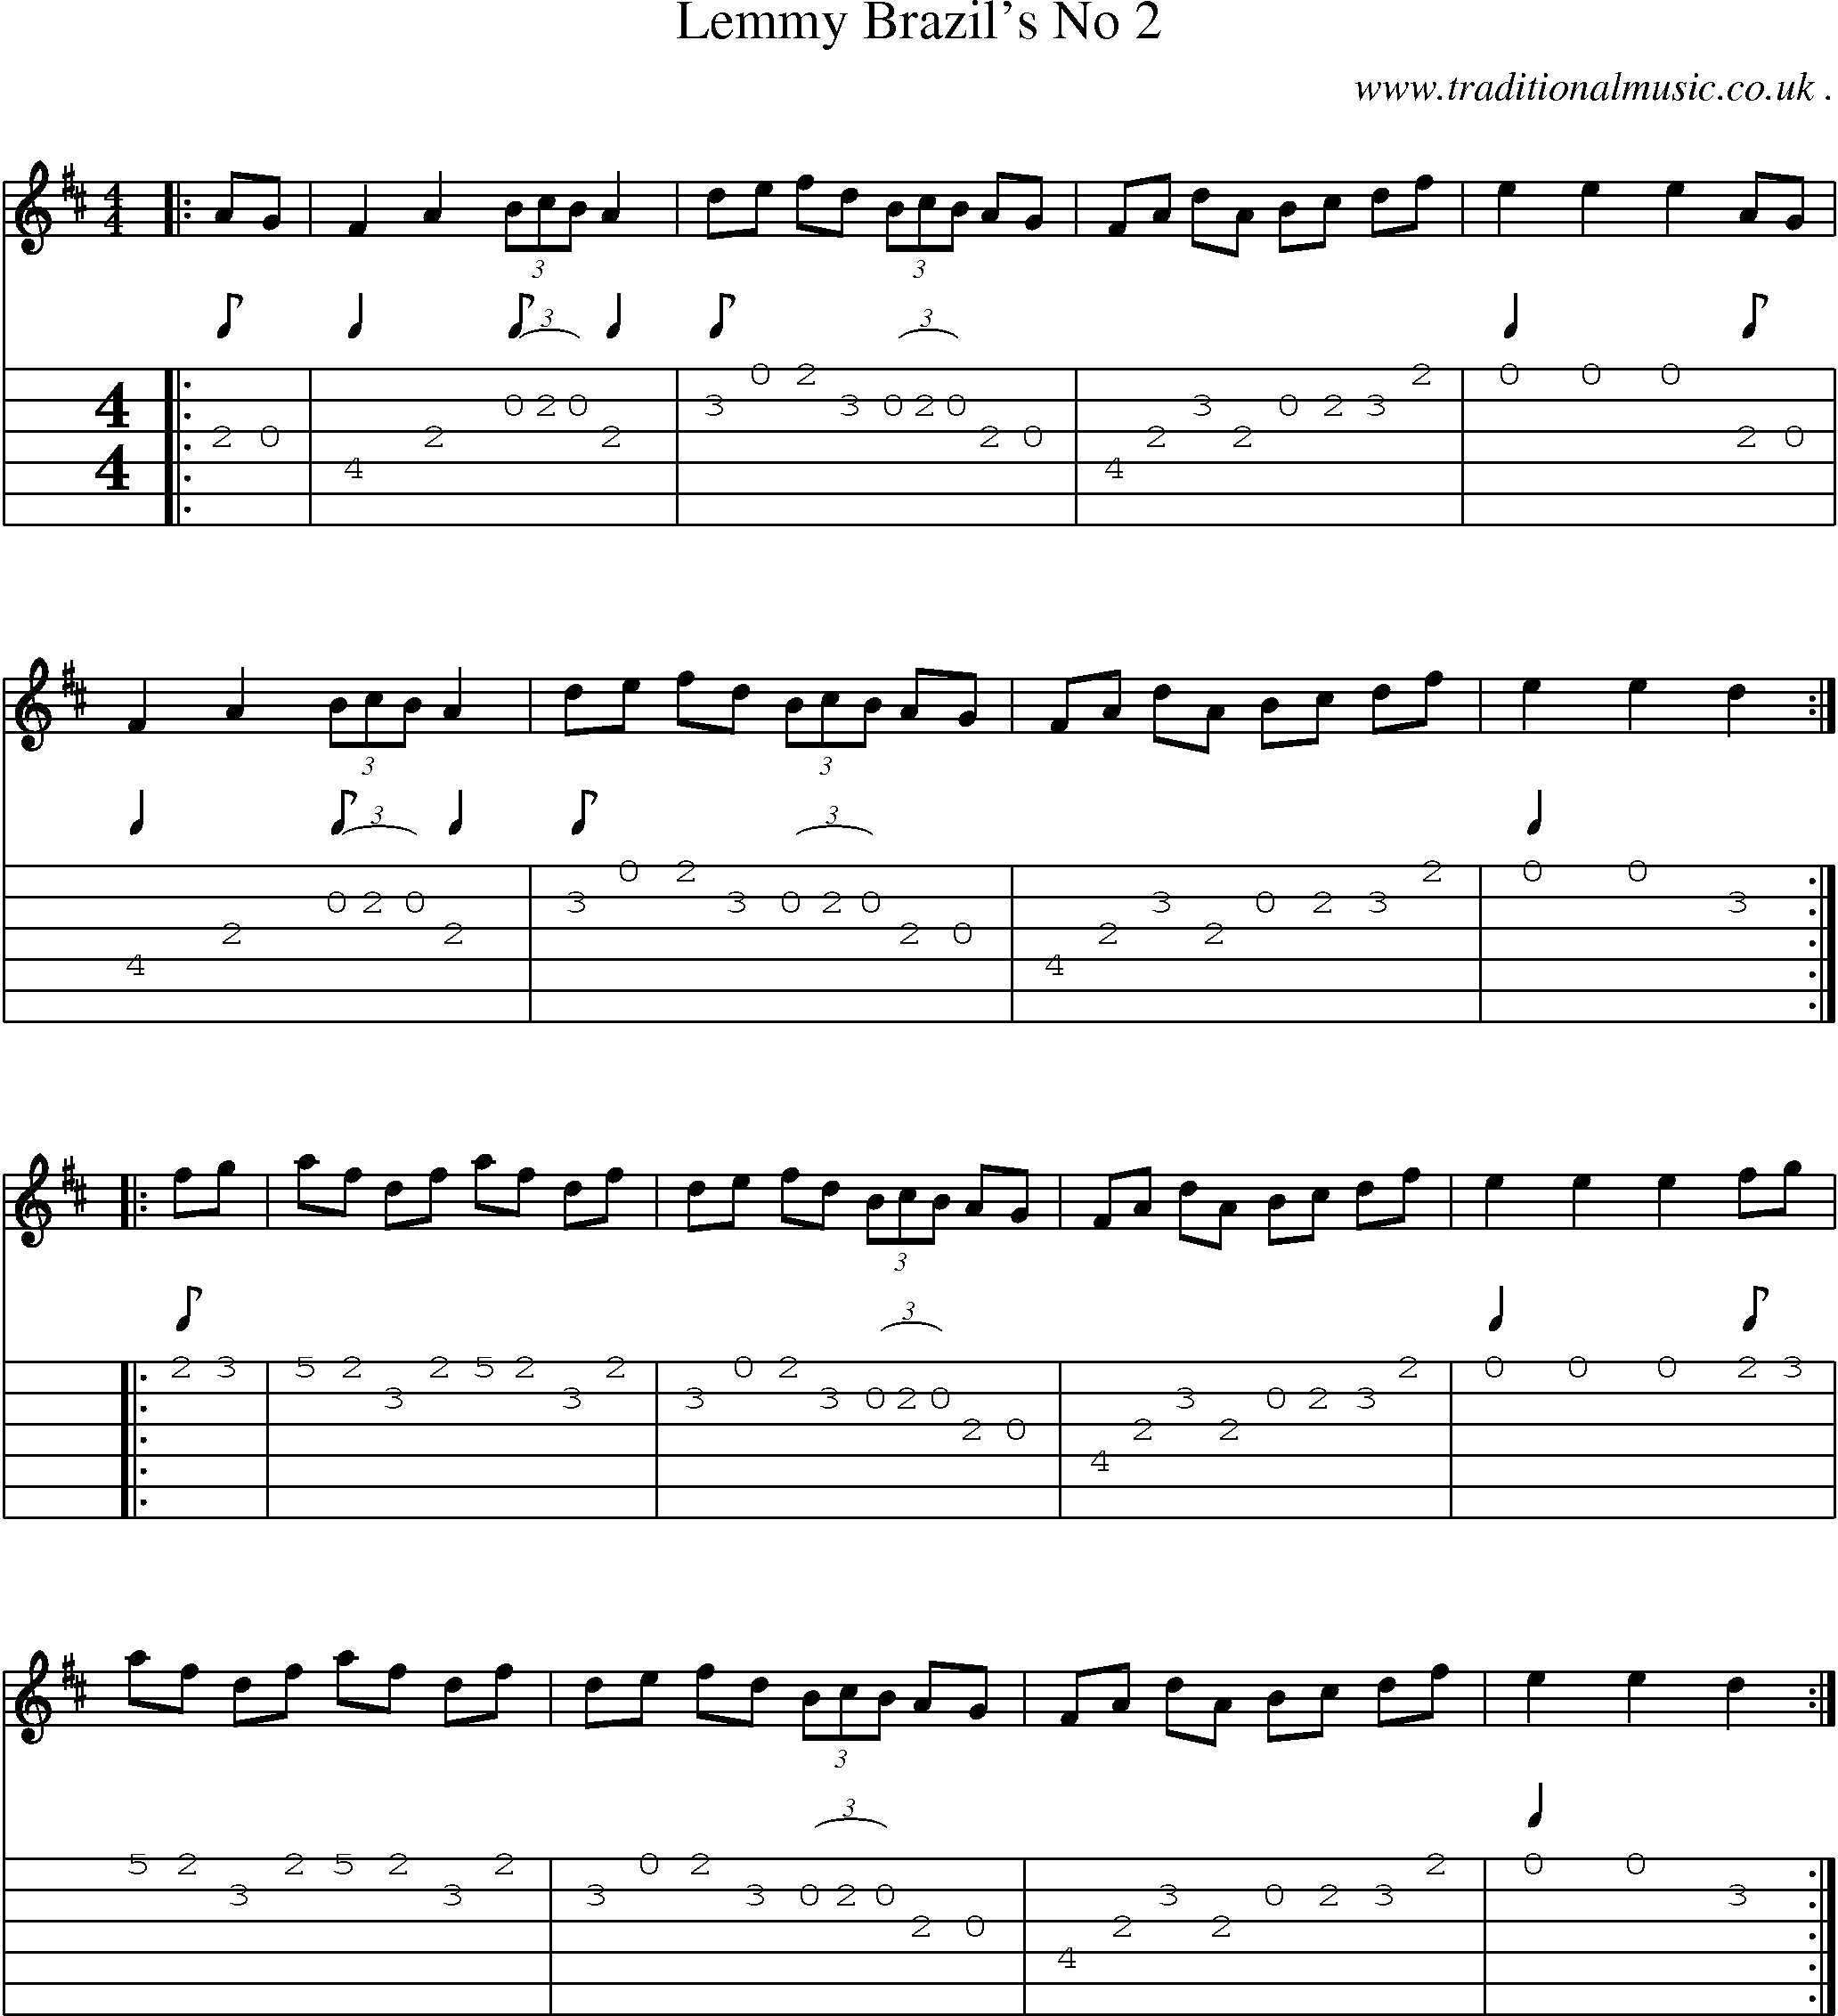 Sheet-Music and Guitar Tabs for Lemmy Brazils No 2